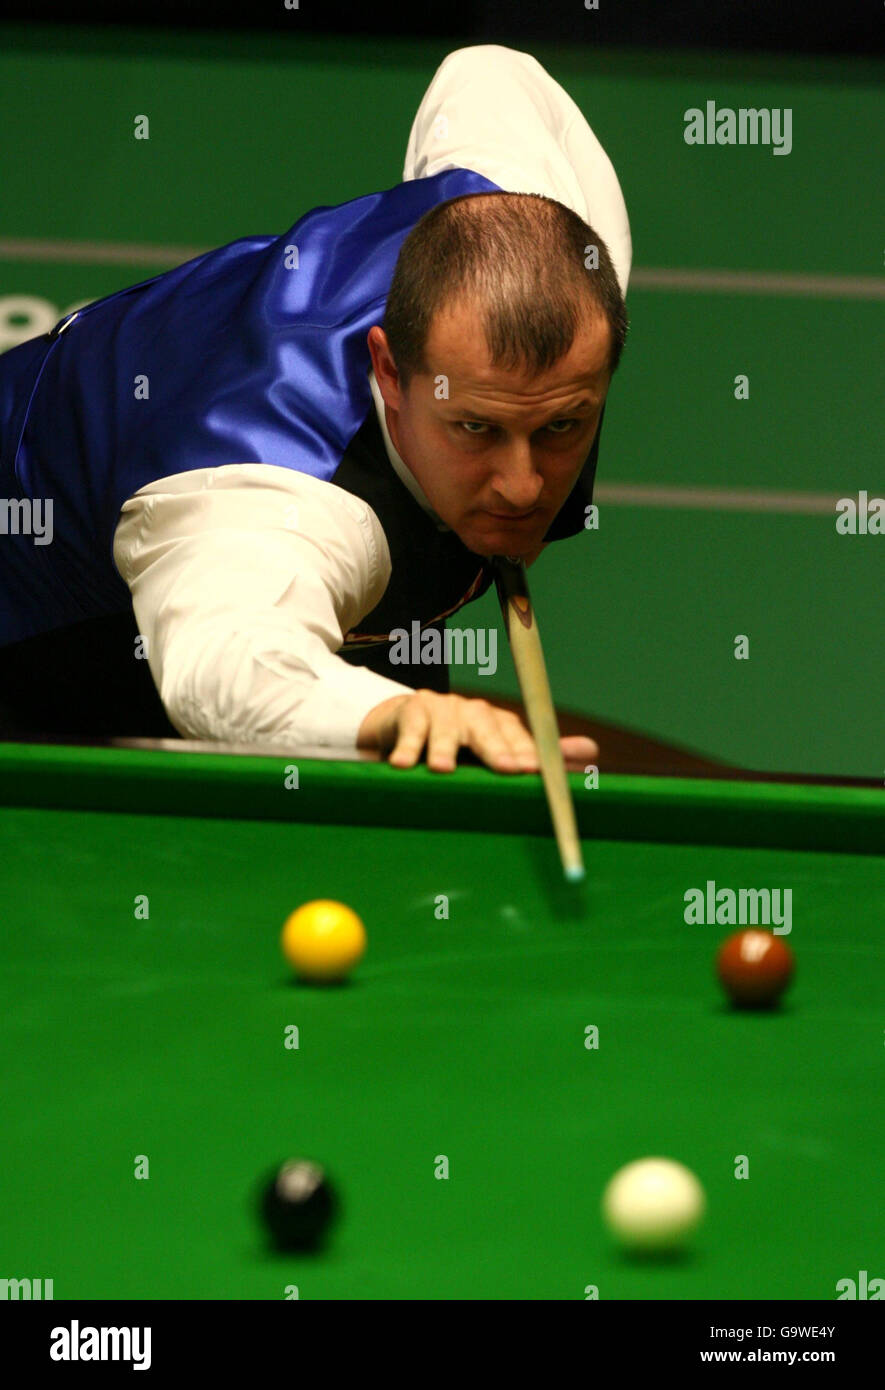 Ian McCulloch in action against Anthony Hamilton during the first round match of the World Snooker Championships at the Crucible Theatre, Sheffield. Stock Photo